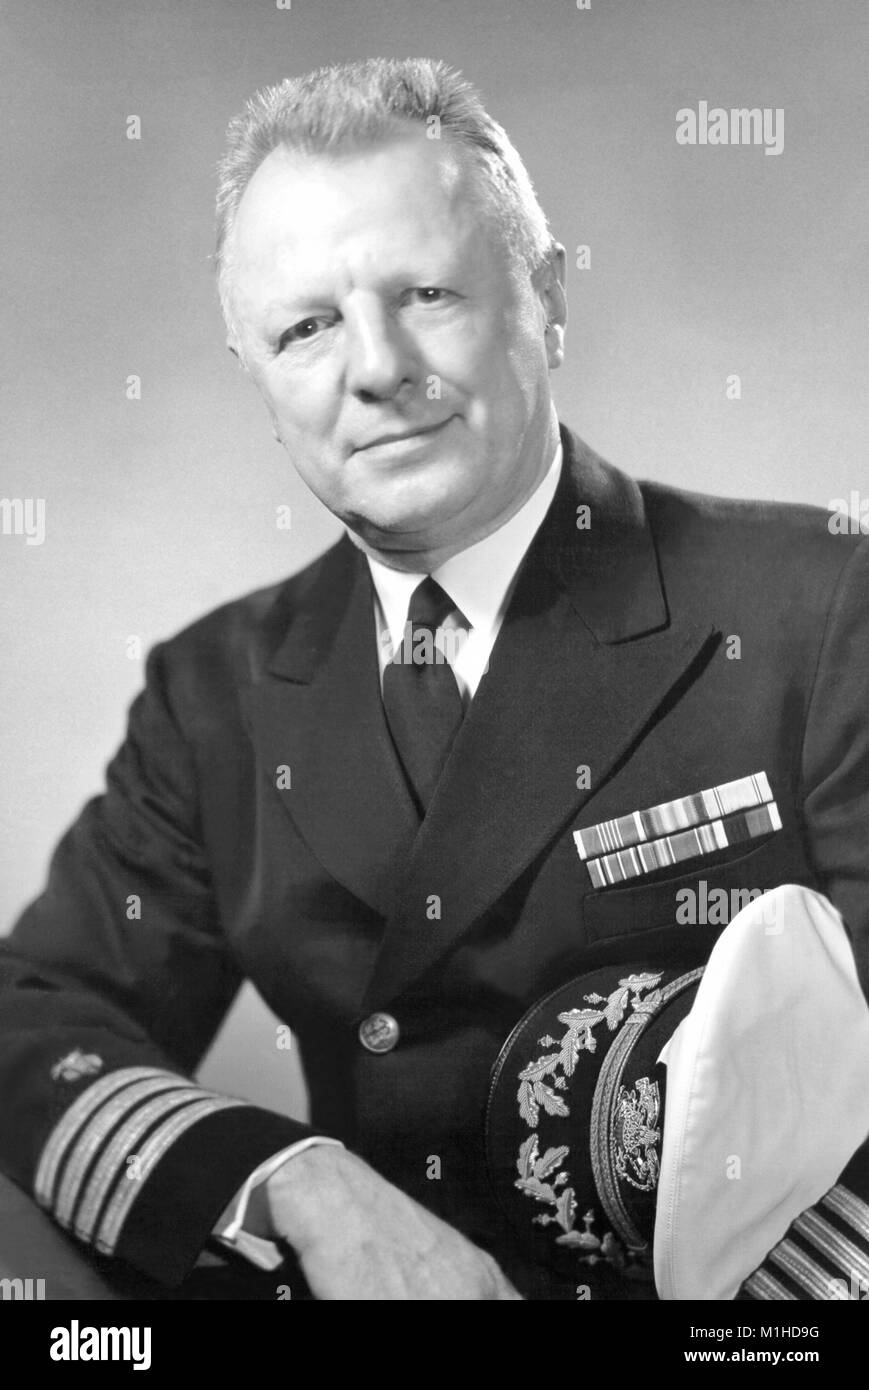 Formal portrait of H. Trendley Dean, D.D.S. in uniform, the first dentist who studied and published the benefits of fluoride in tooth decay prevention, worked in finding optimal levels of fluoride in preventing caries without staining (fluorosis) and advocated for use of fluoride in public drinking water, 1955. Image courtesy CDC. () Stock Photo